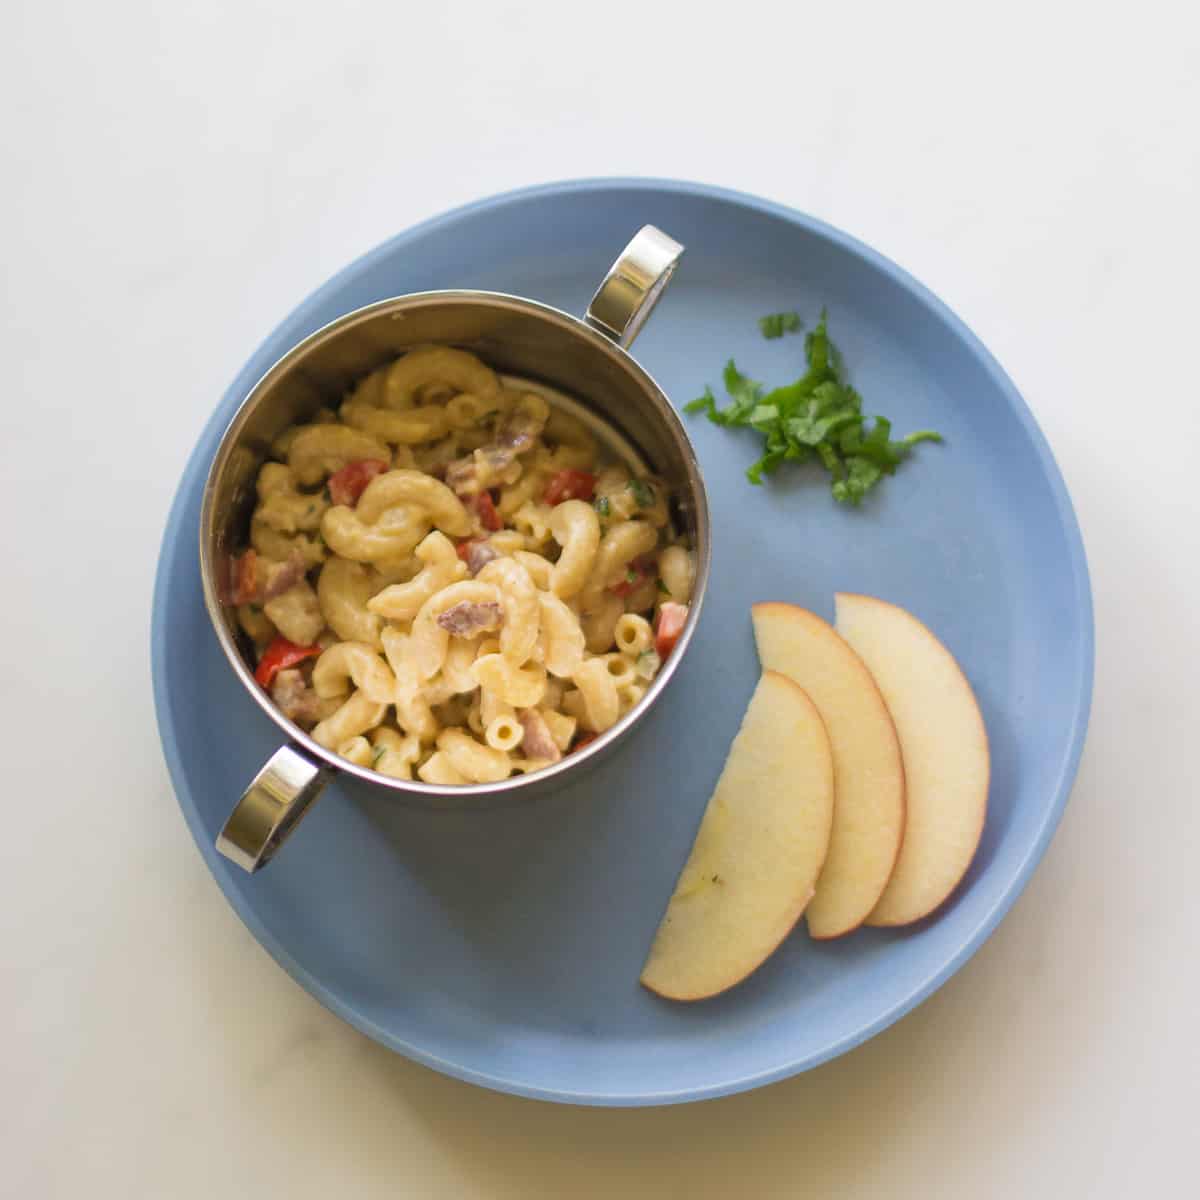 Carbonara in a stainless bowl with sliced apples and a tiny portion of parsley.